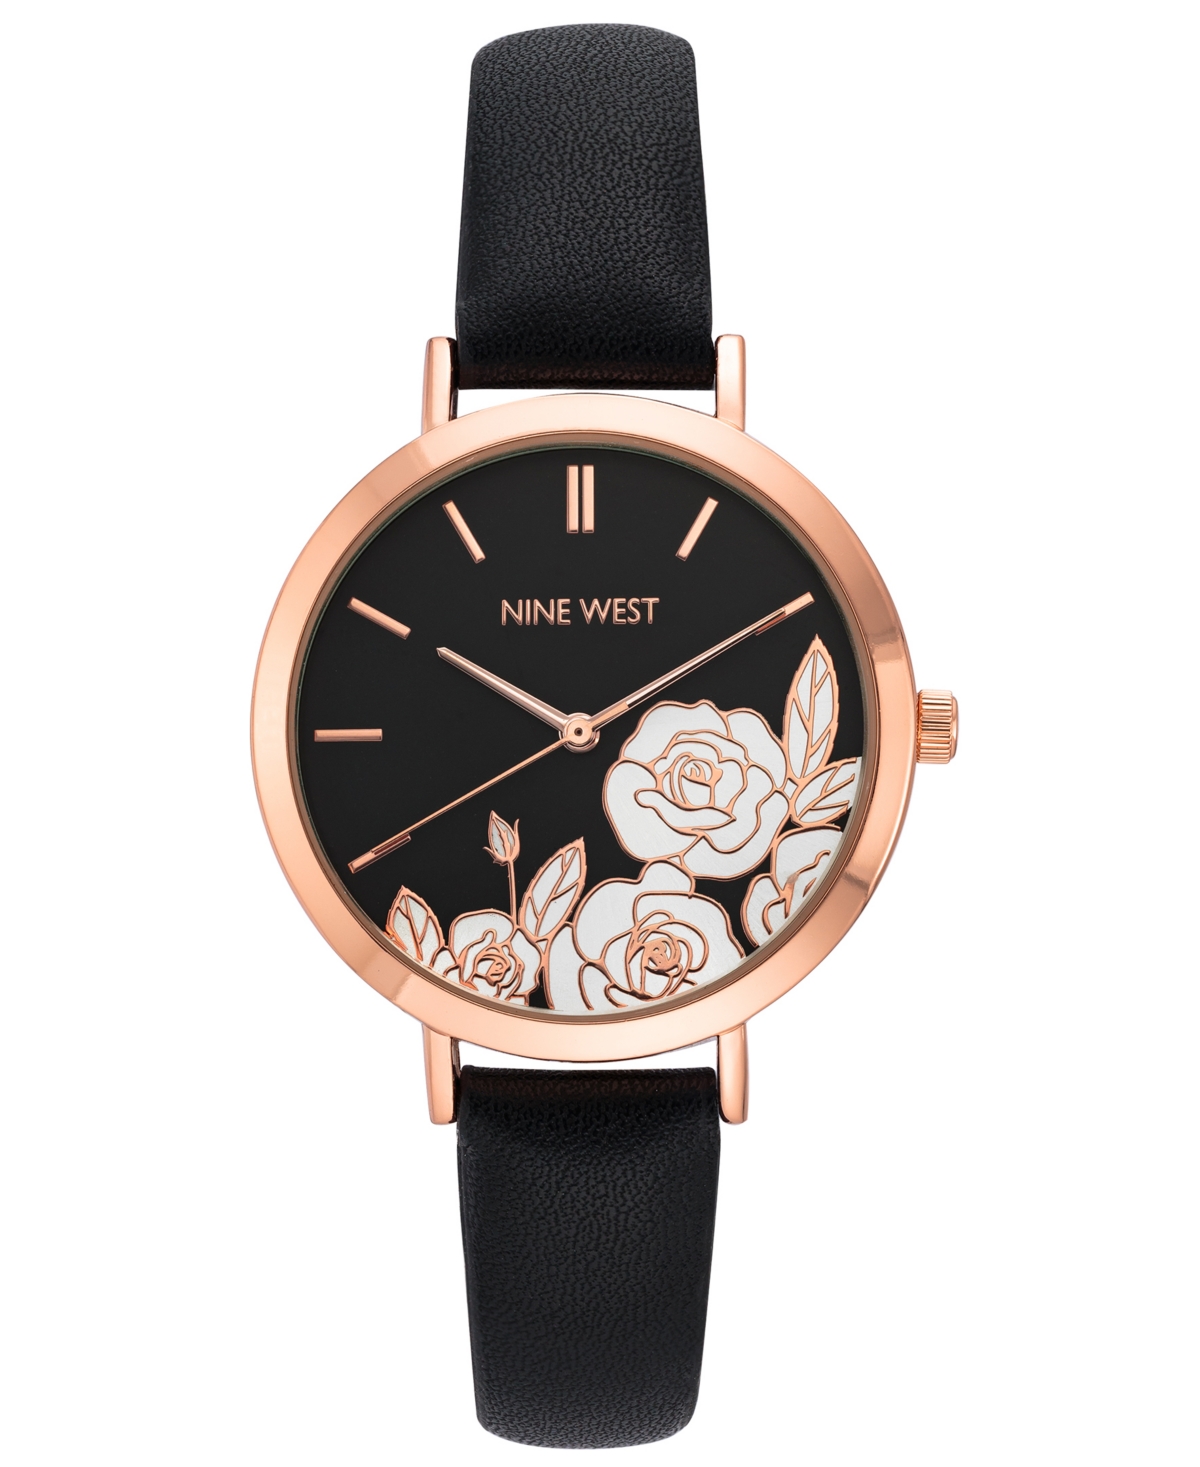 Nine West Women's Quartz Black Faux Leather Band And Floral Pattern Watch, 36.5mm In Black,rose Gold-tone